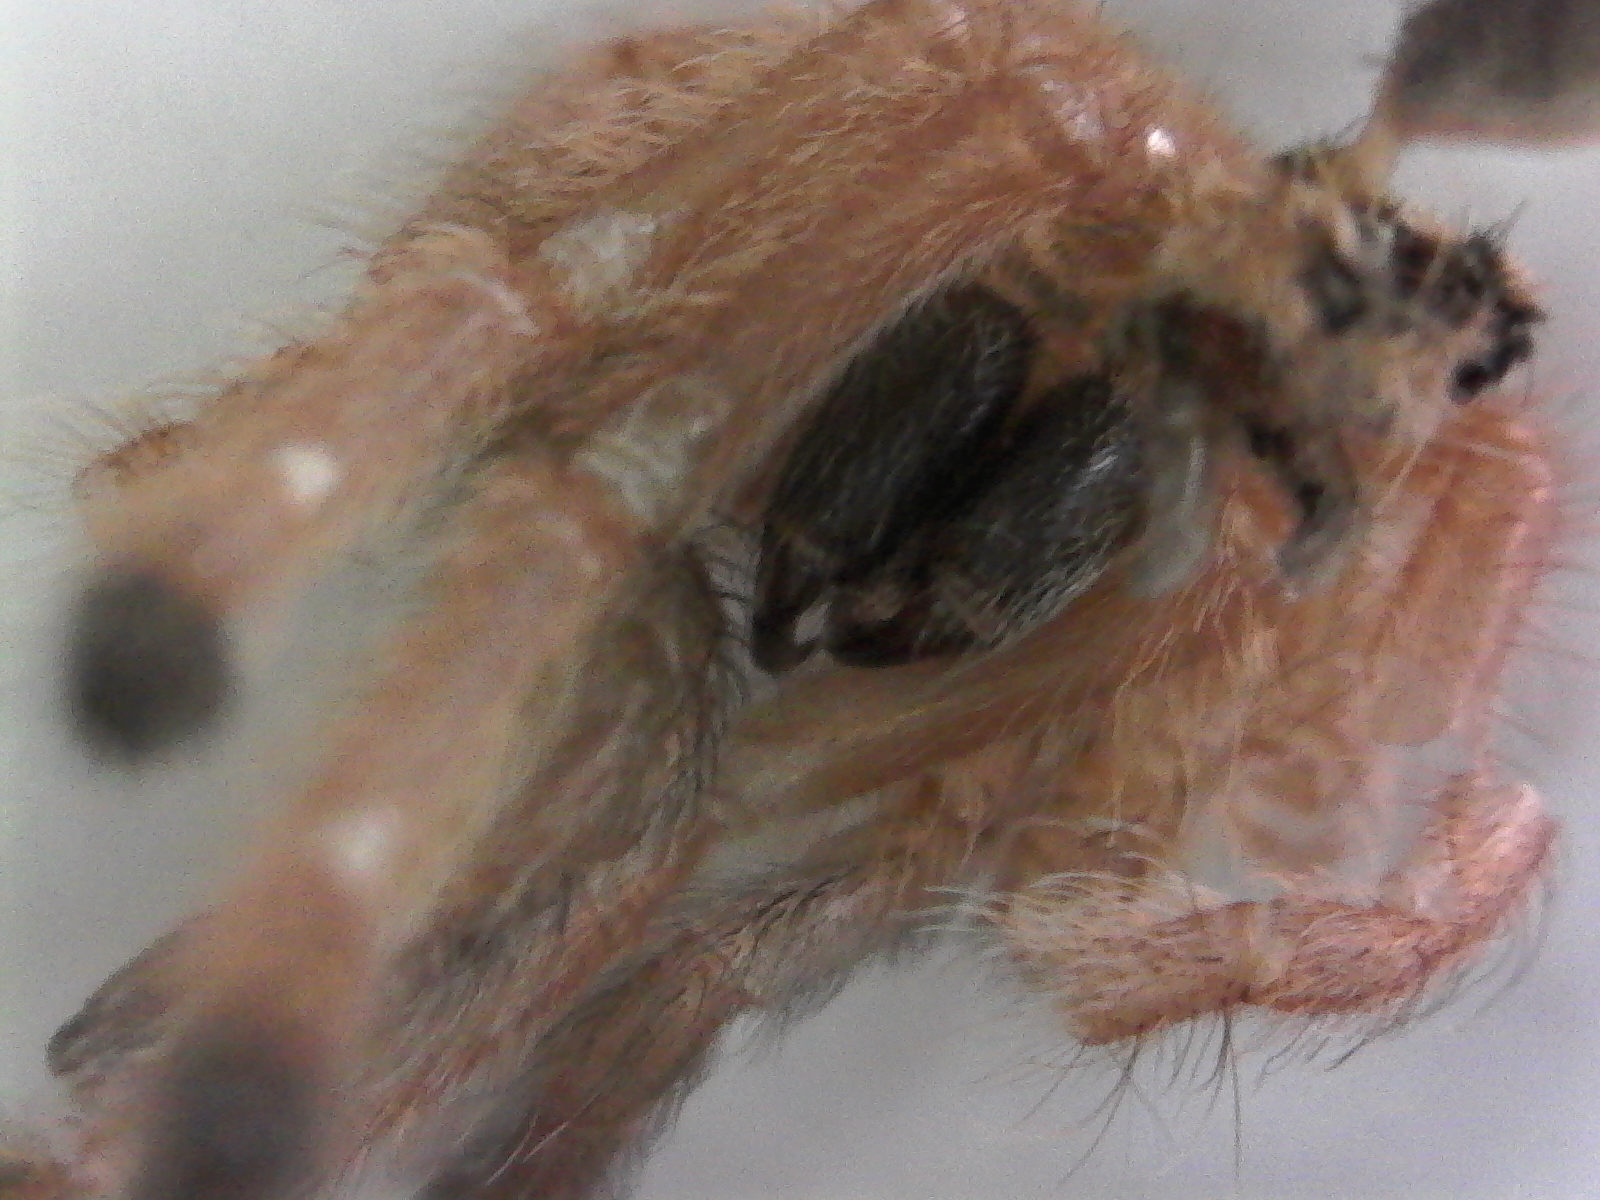 P. gigas chelicerae and fangs, close up